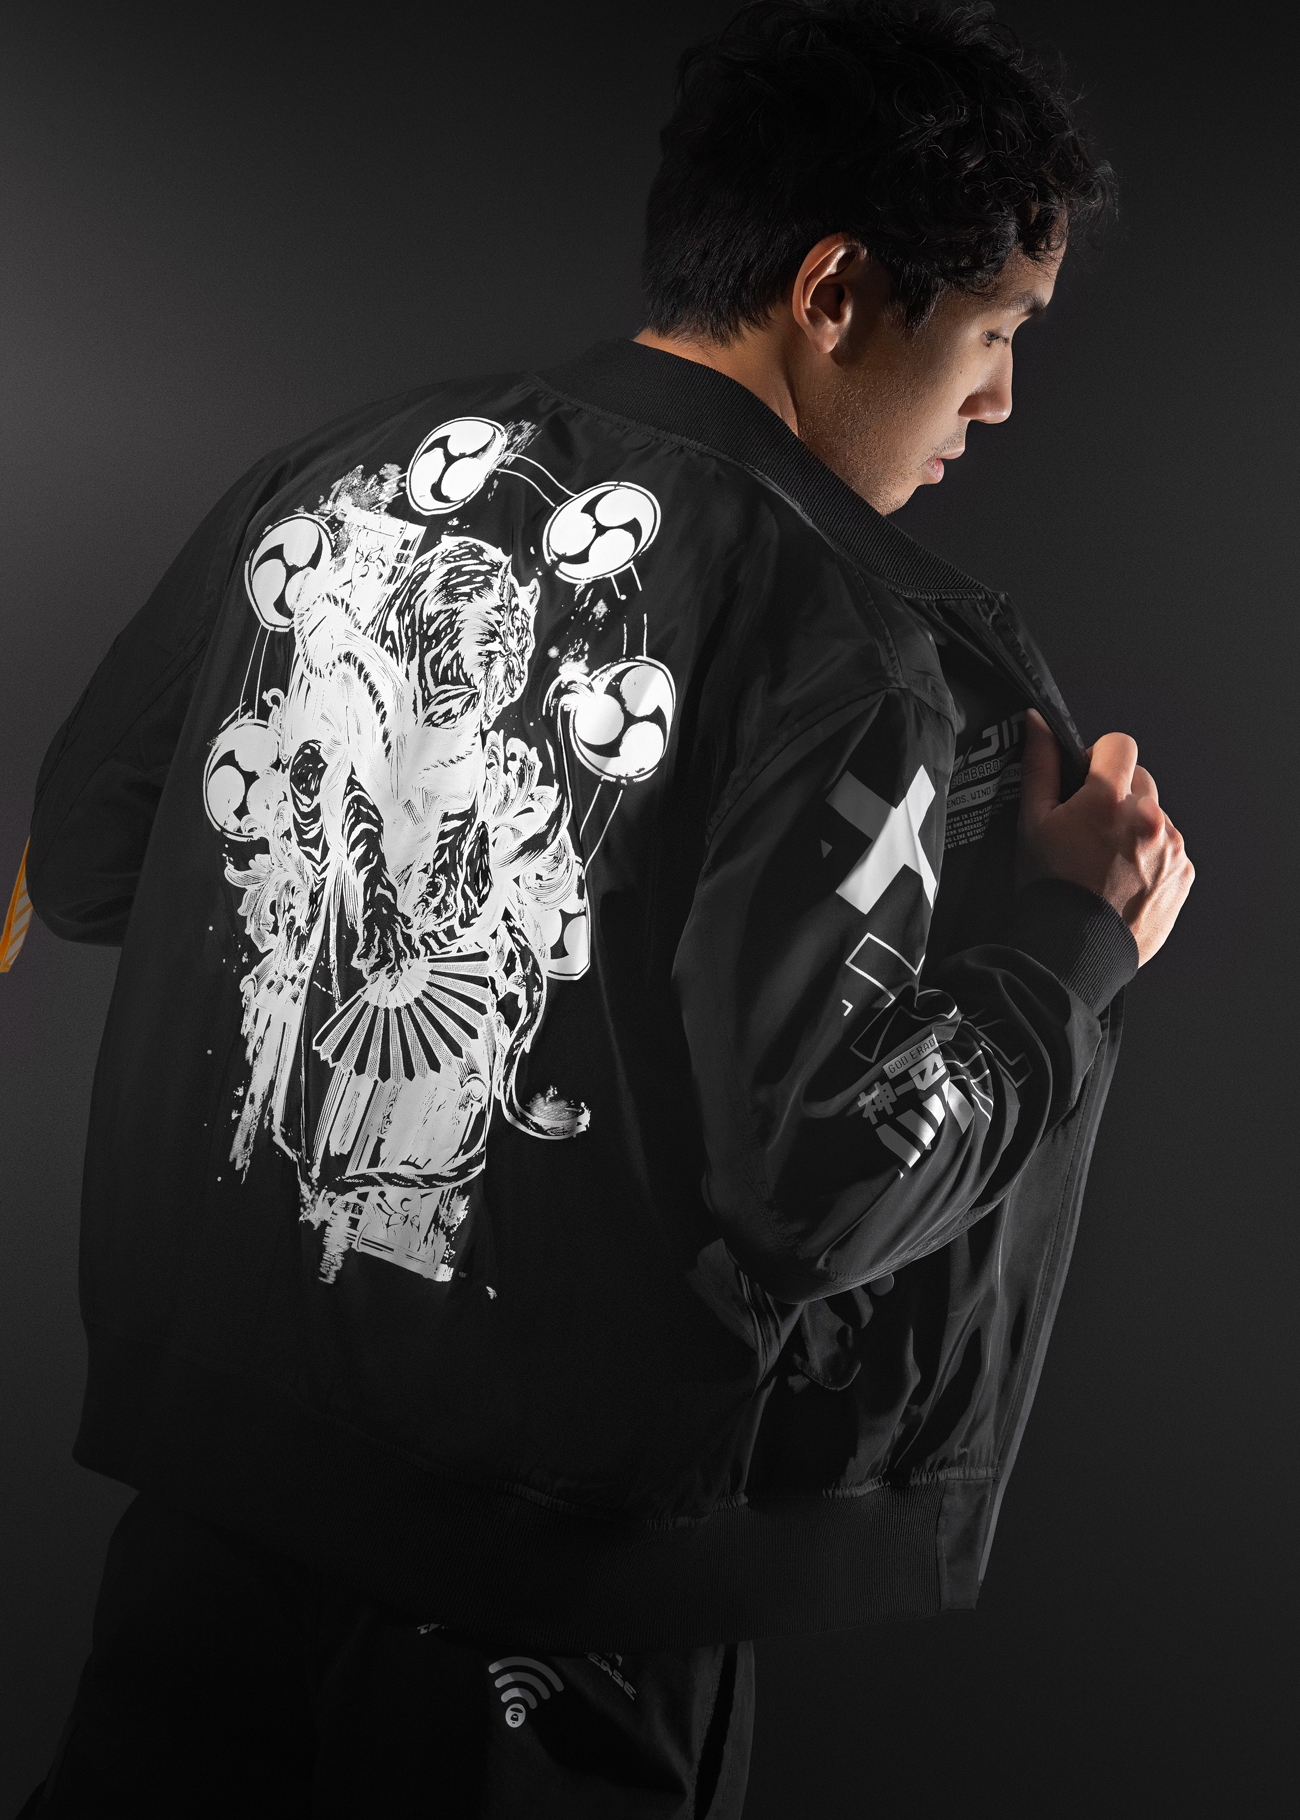 Black Bomber Jacket featuring The Raijin, a figure from japanese mythology converted to a high quality anime inspired bomber jacket